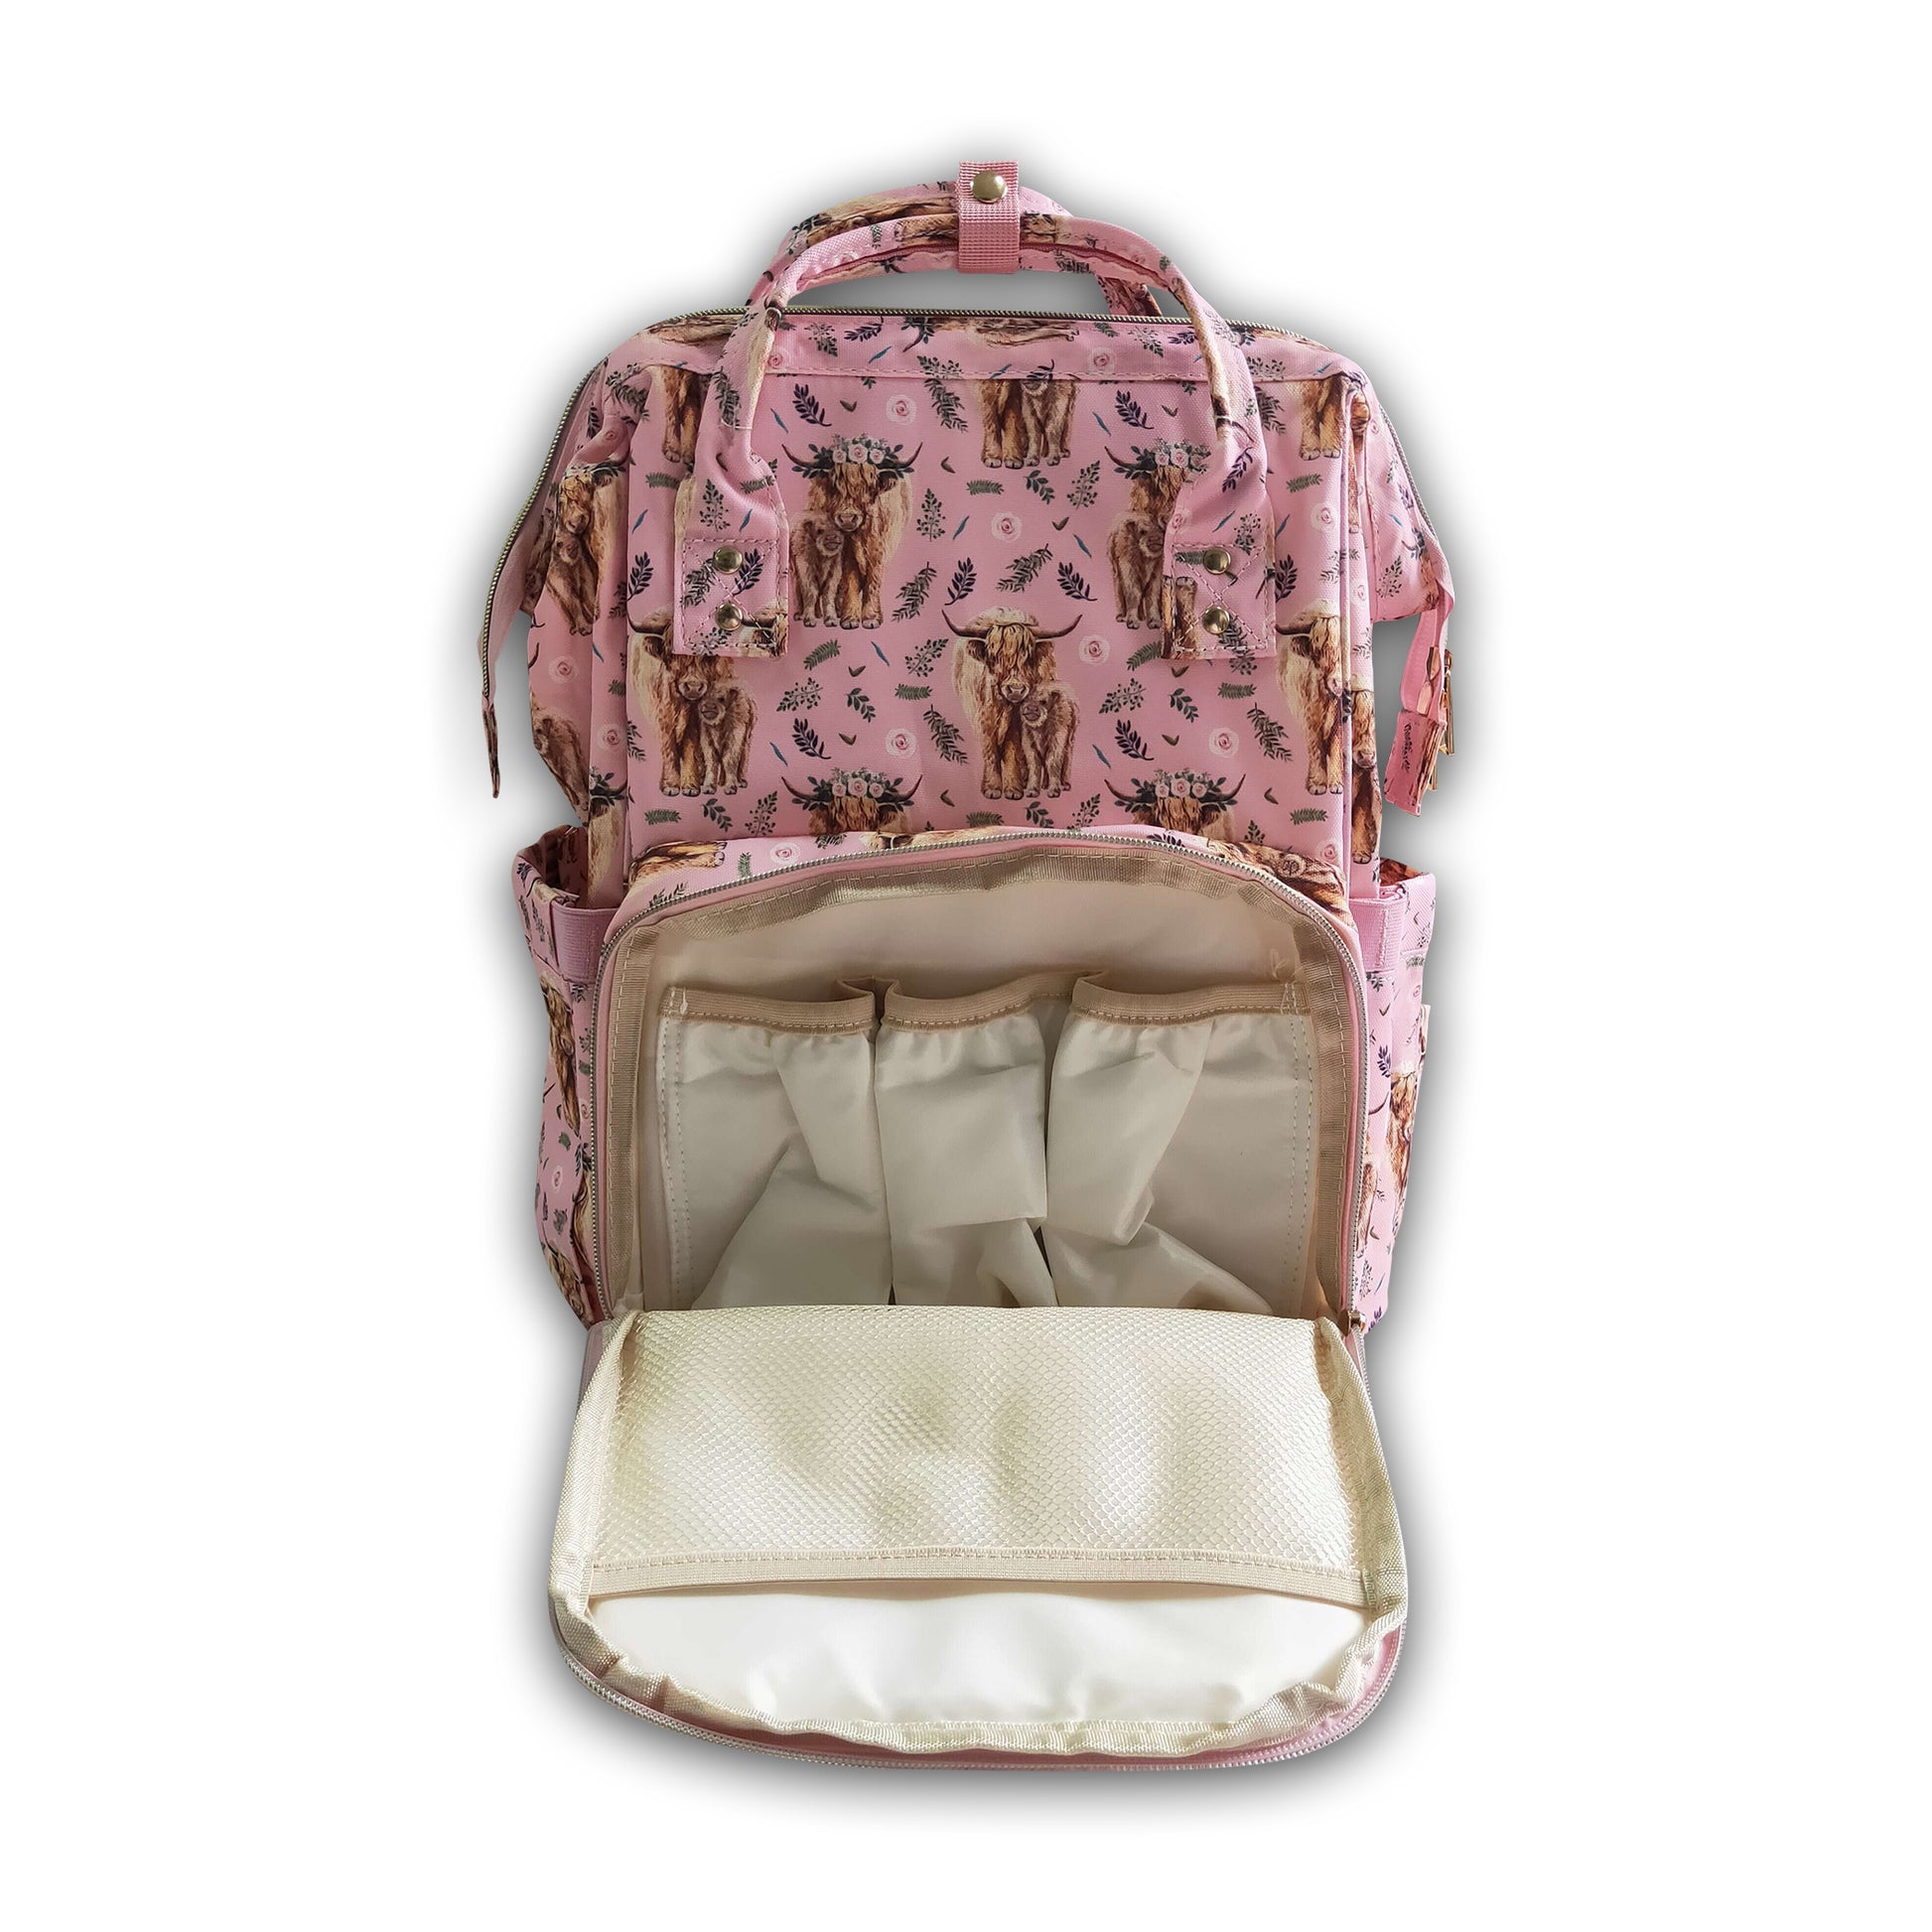 Highland cow floral baby diaper backpack – Yawoo Garments